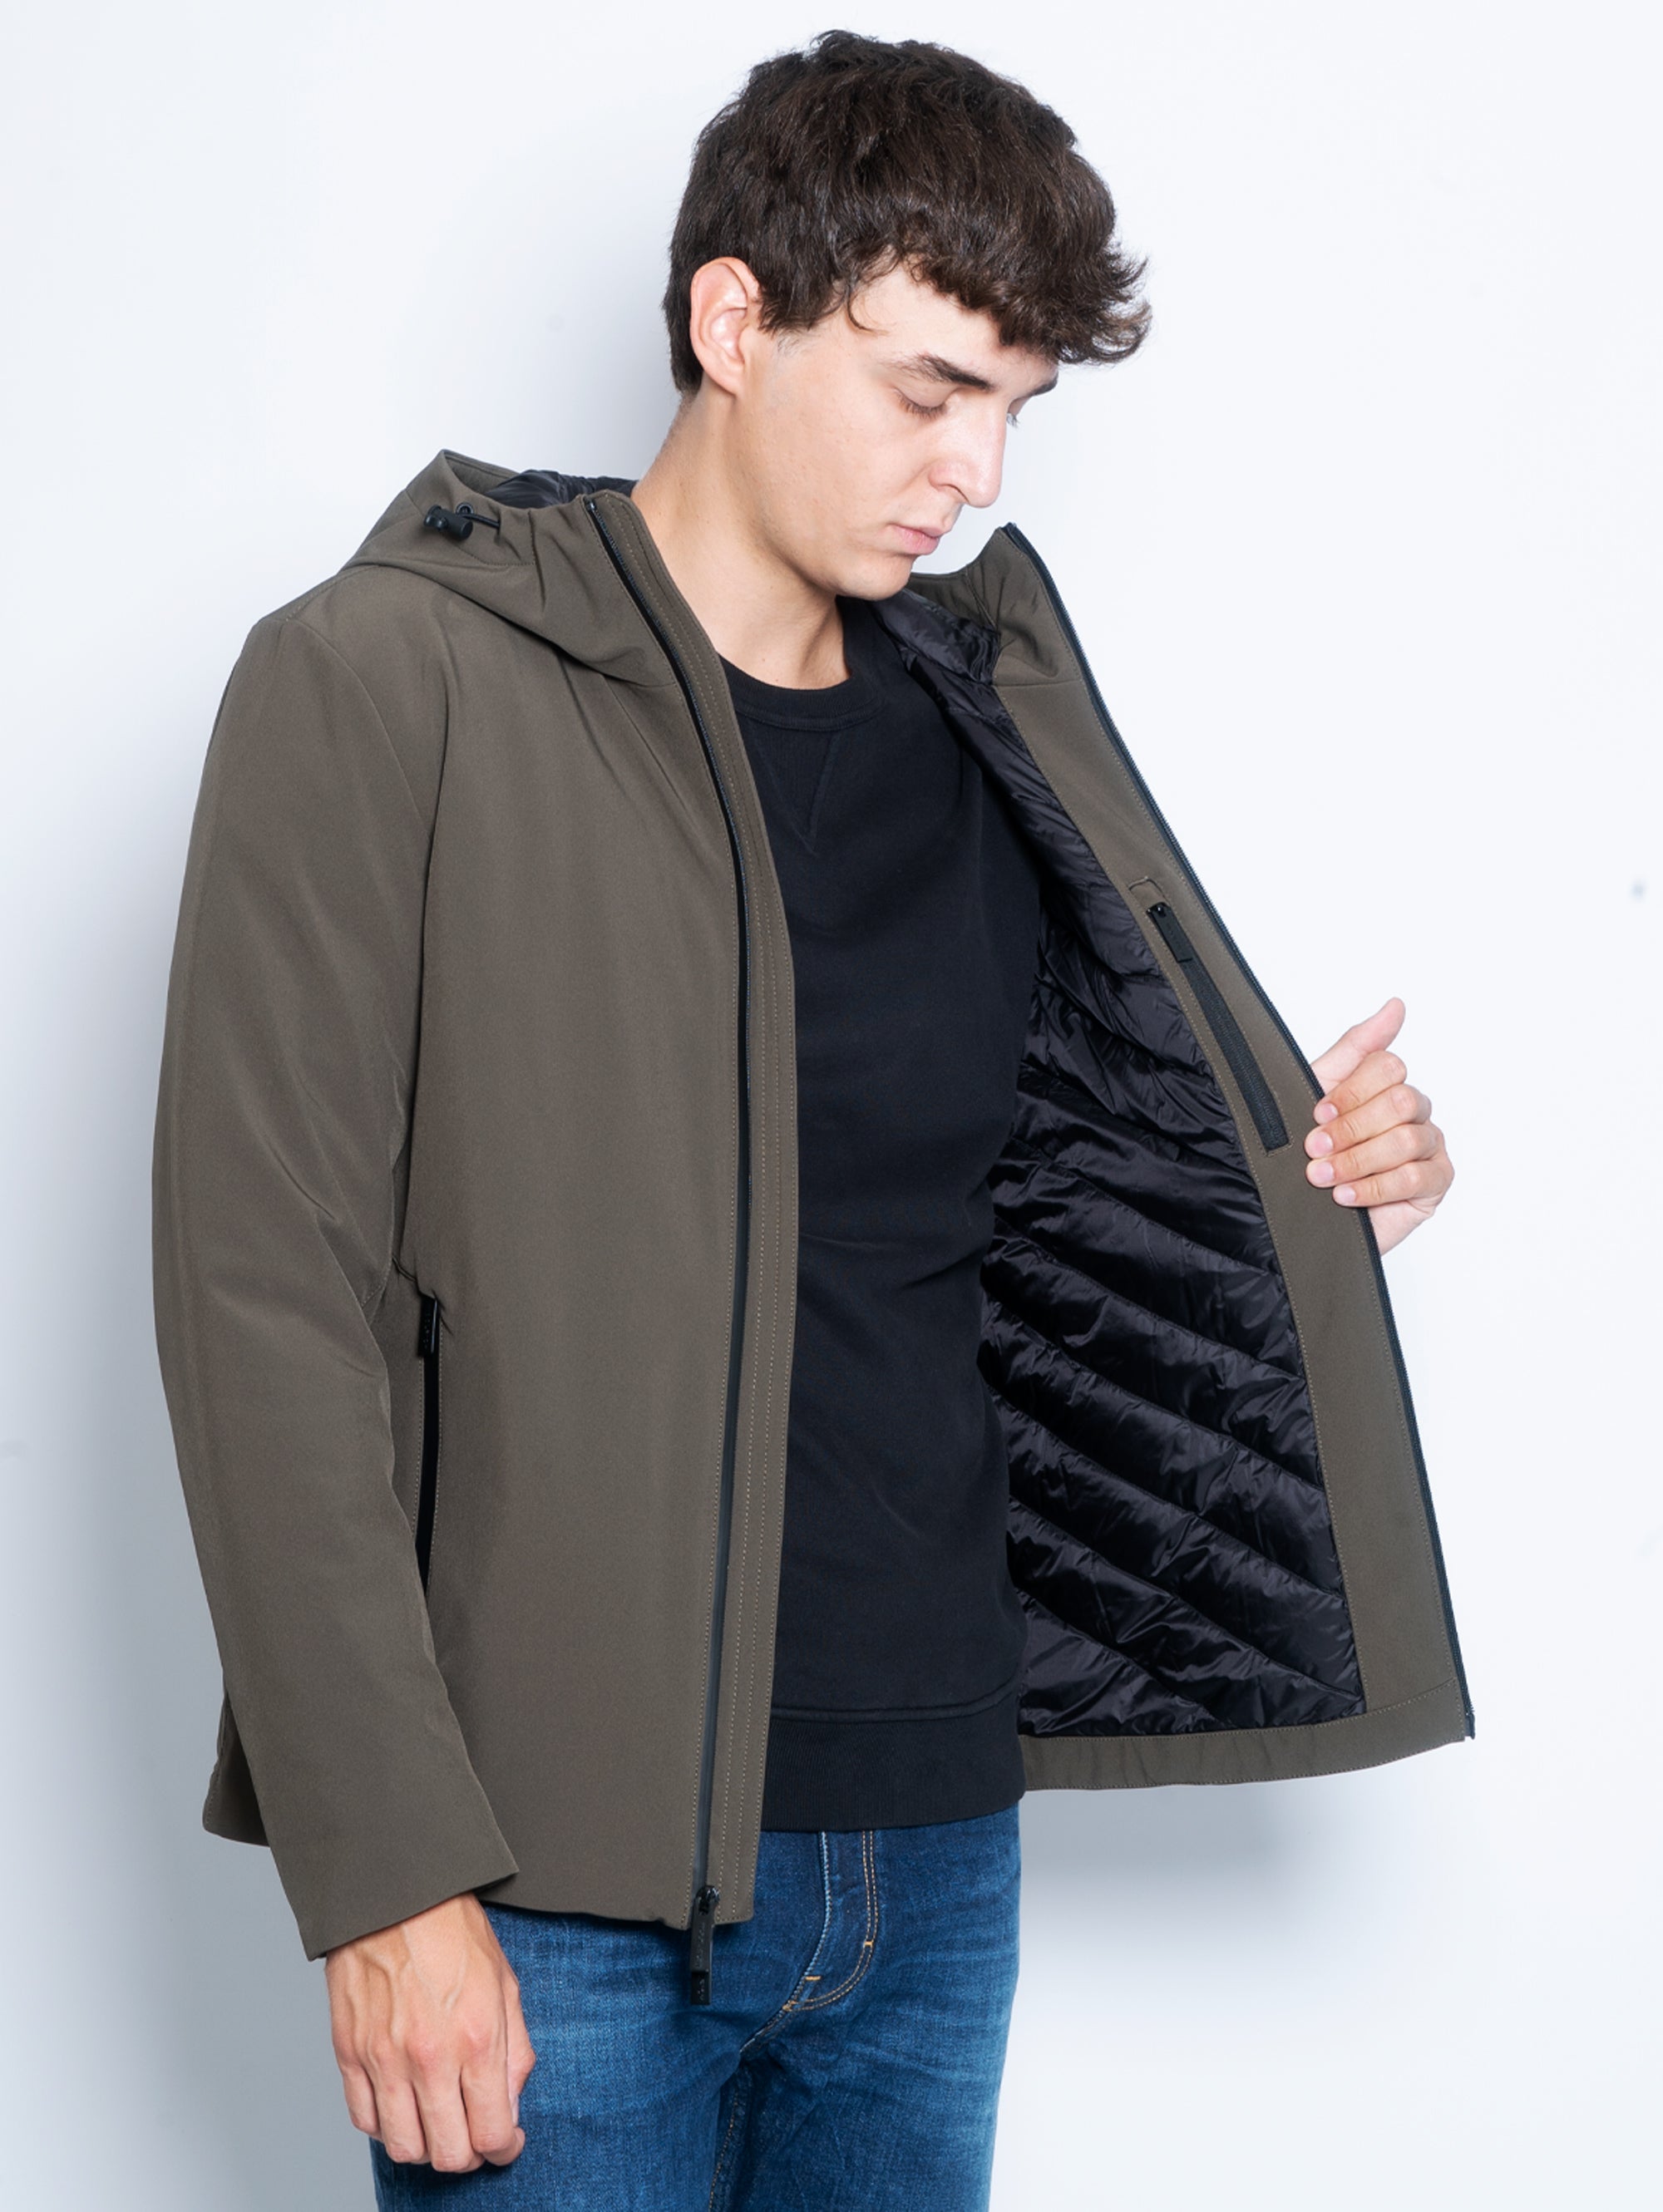 Pacific Green Windproof Hooded Jacket